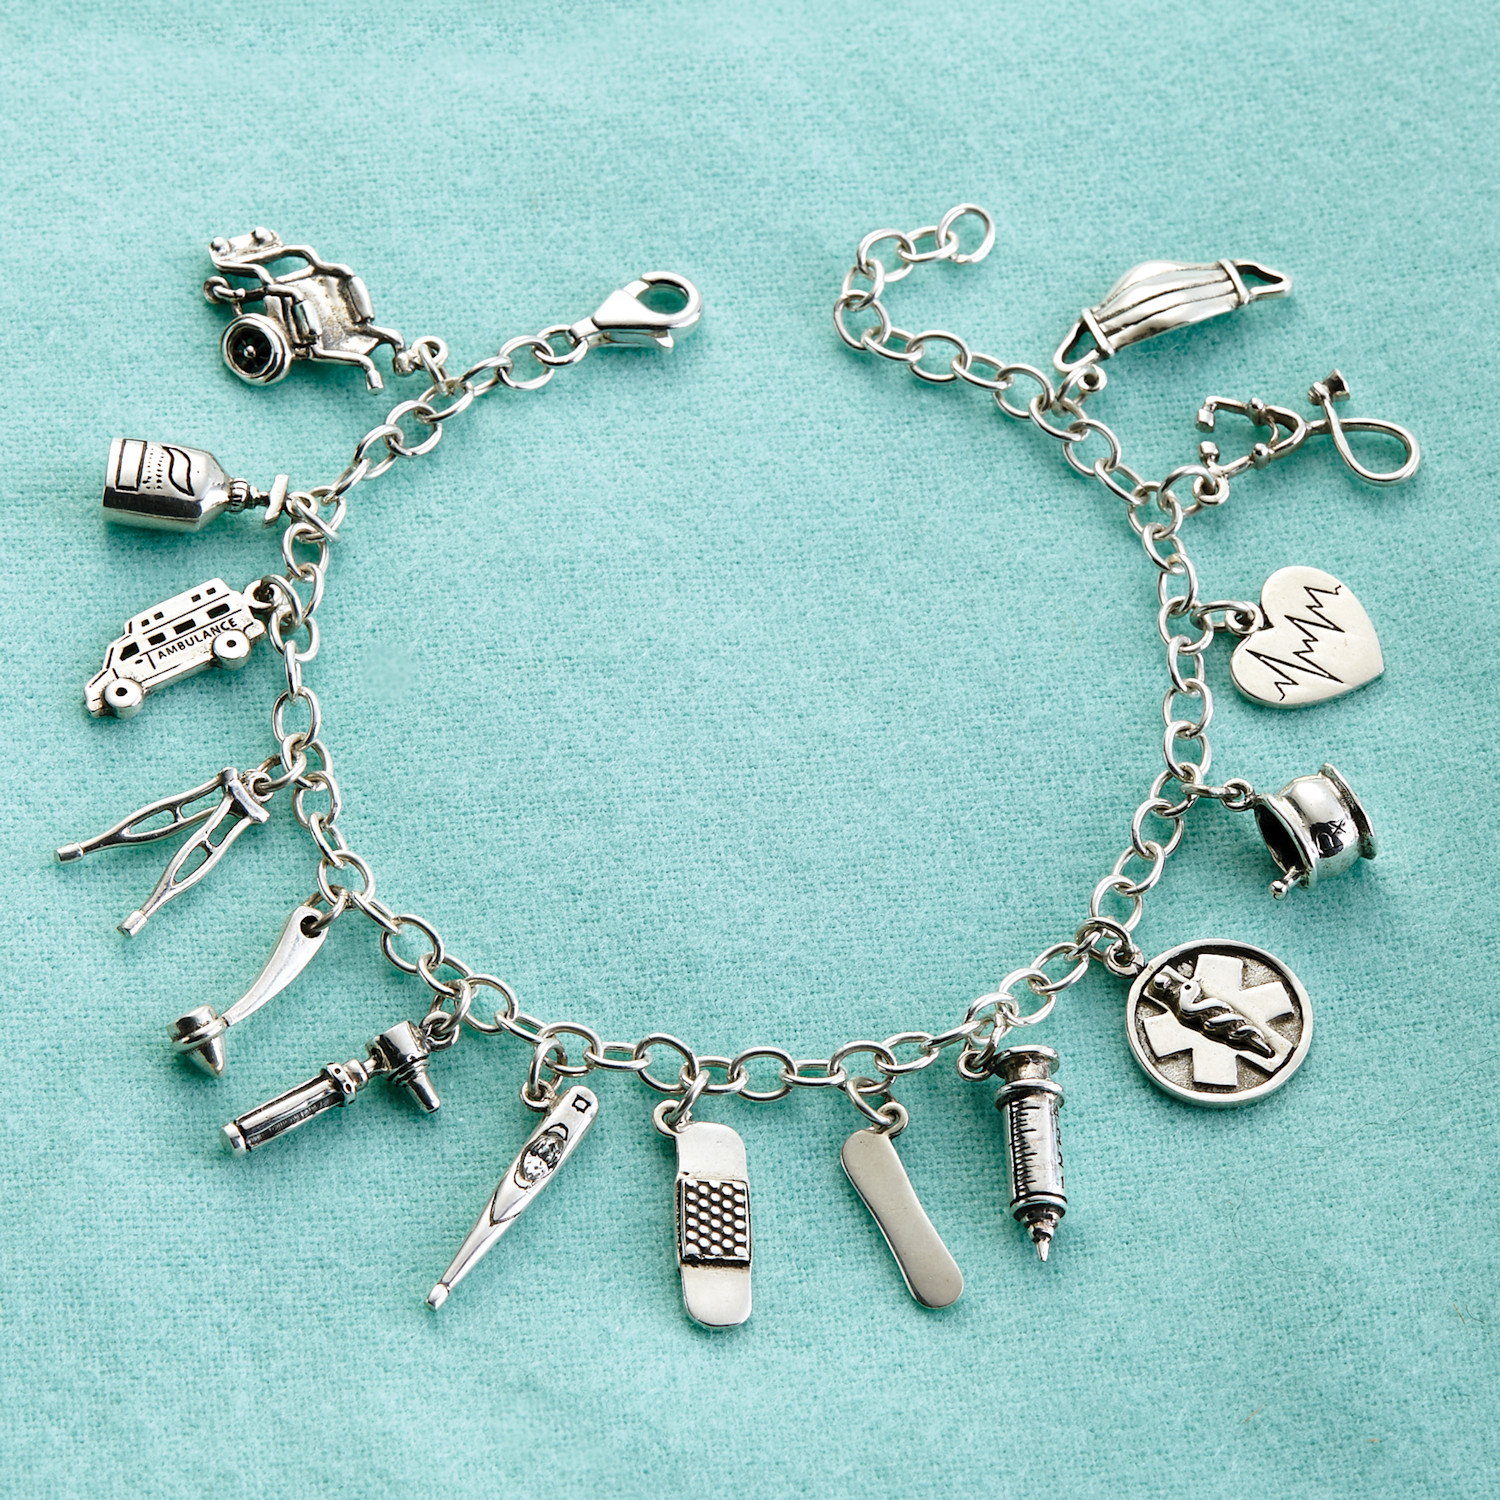 Update more than 138 antique silver charm bracelet